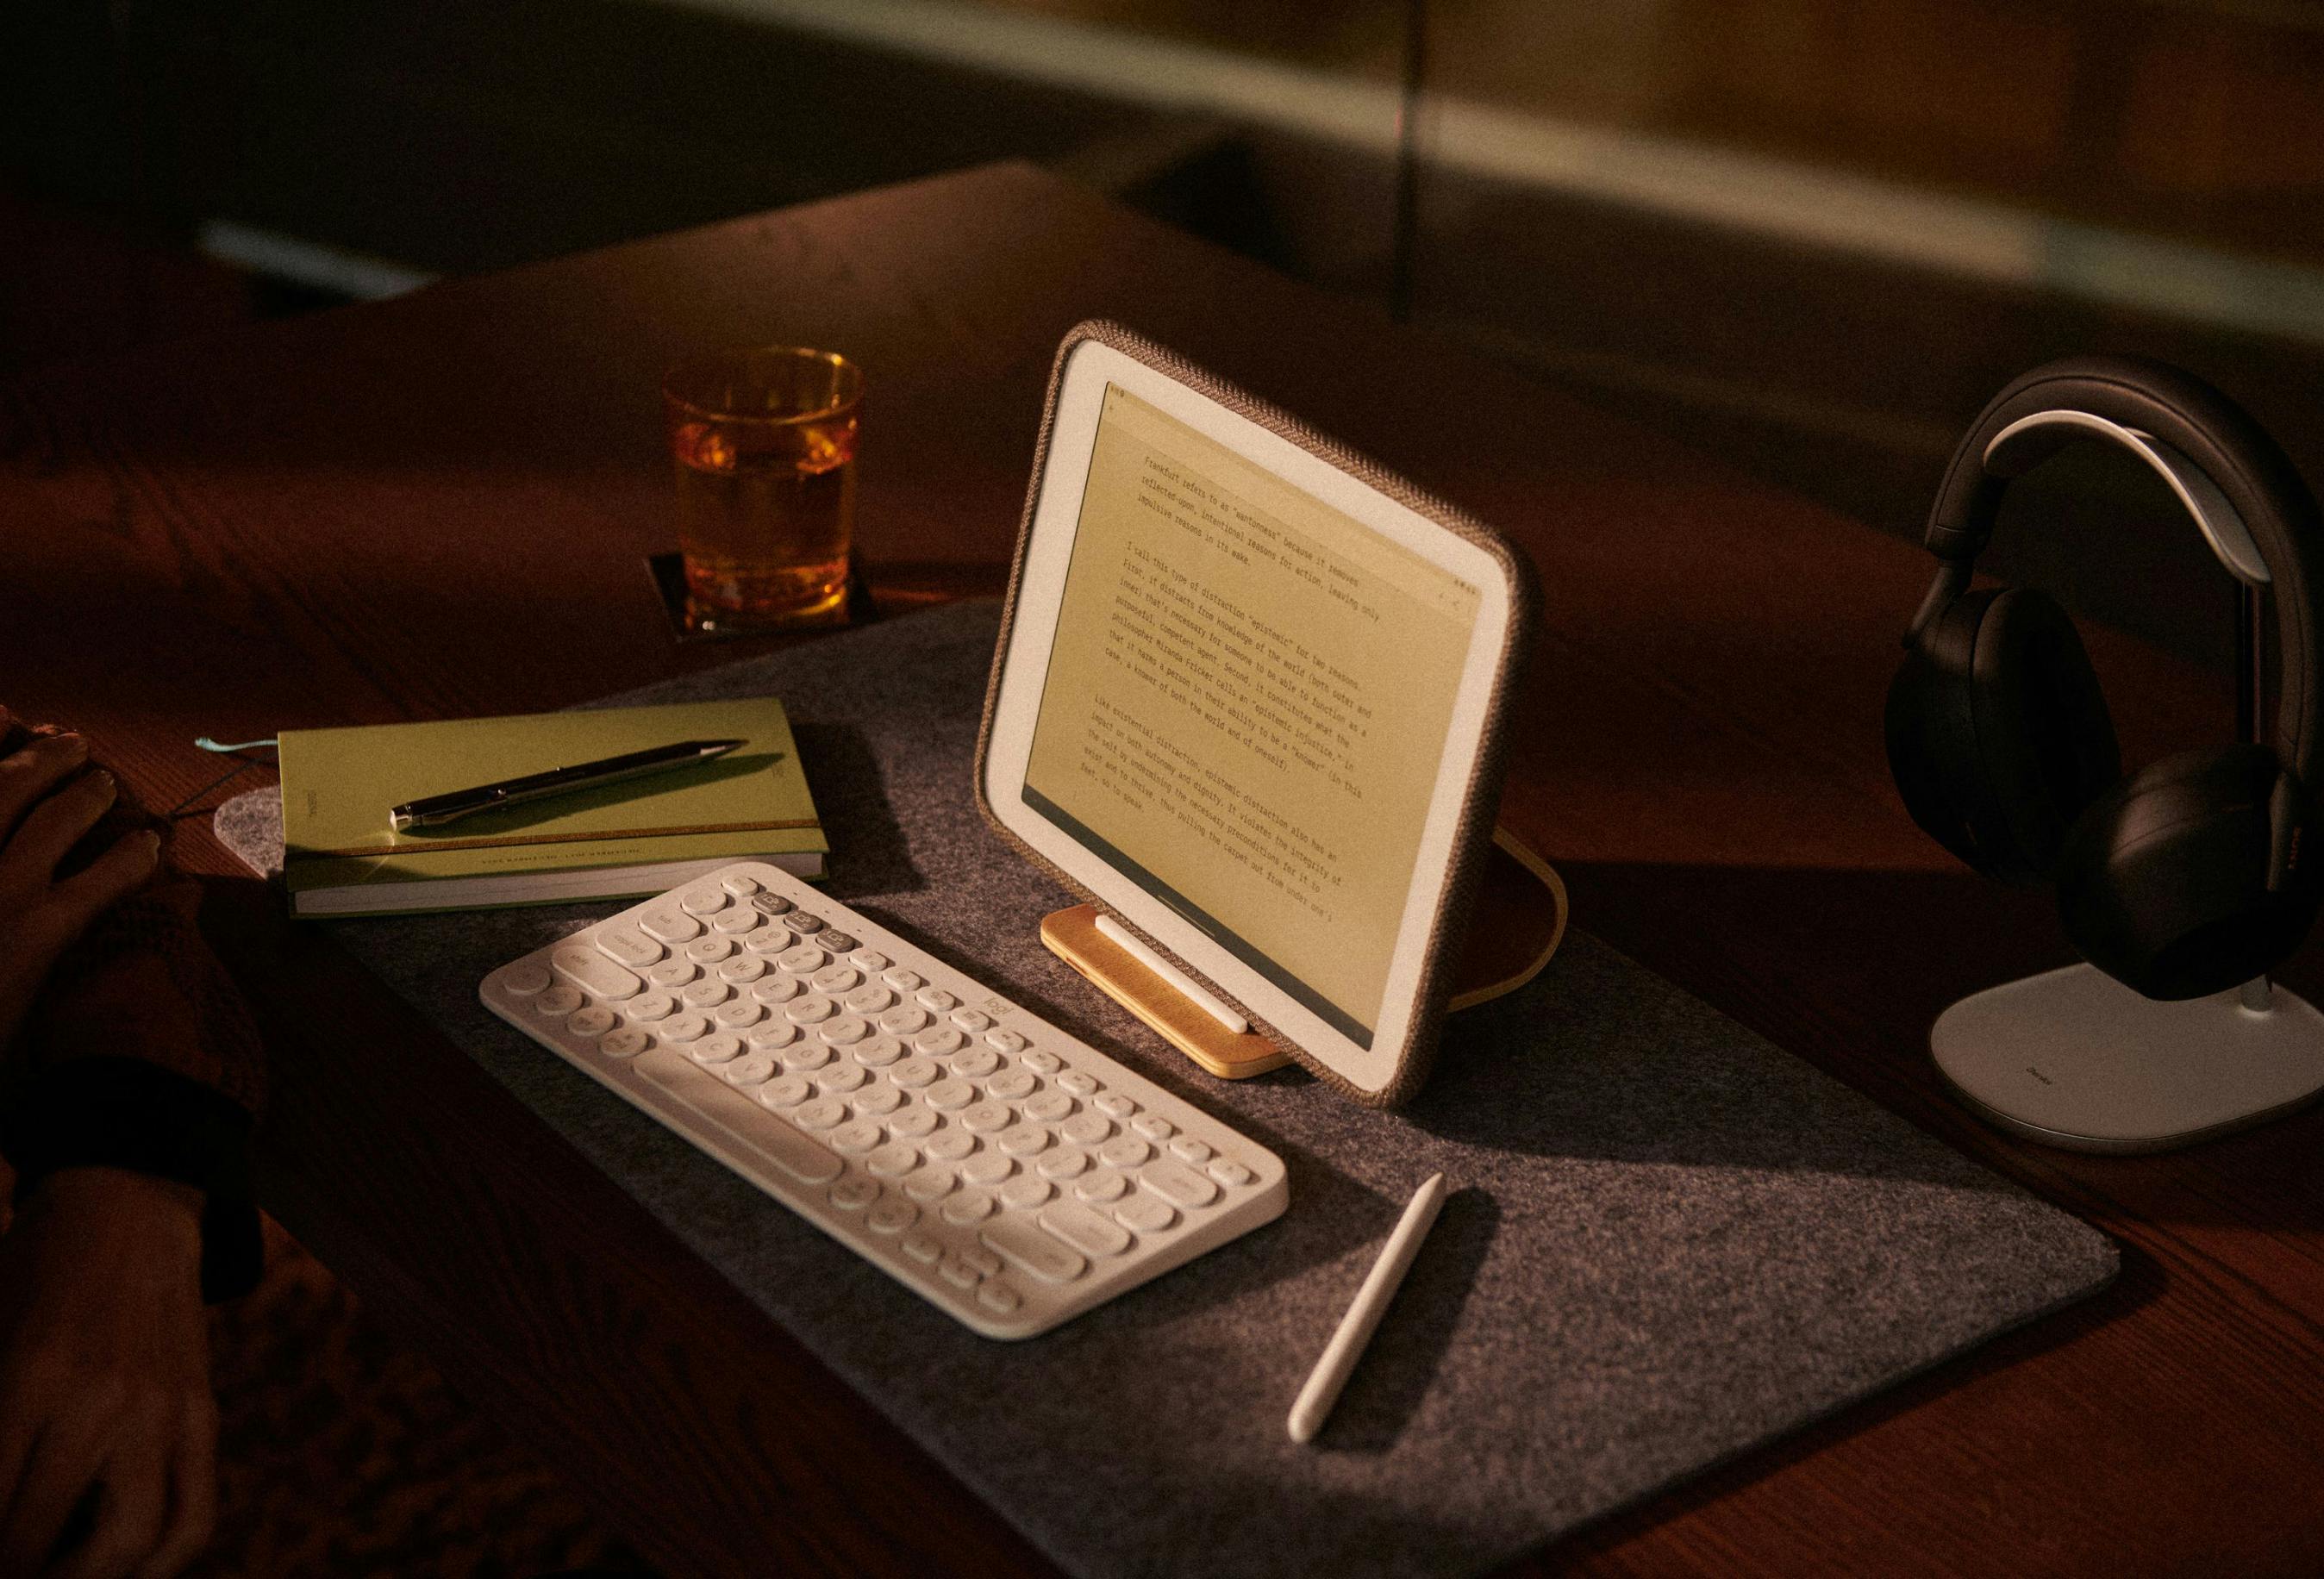 daylight tablet at a desk with calm illumination